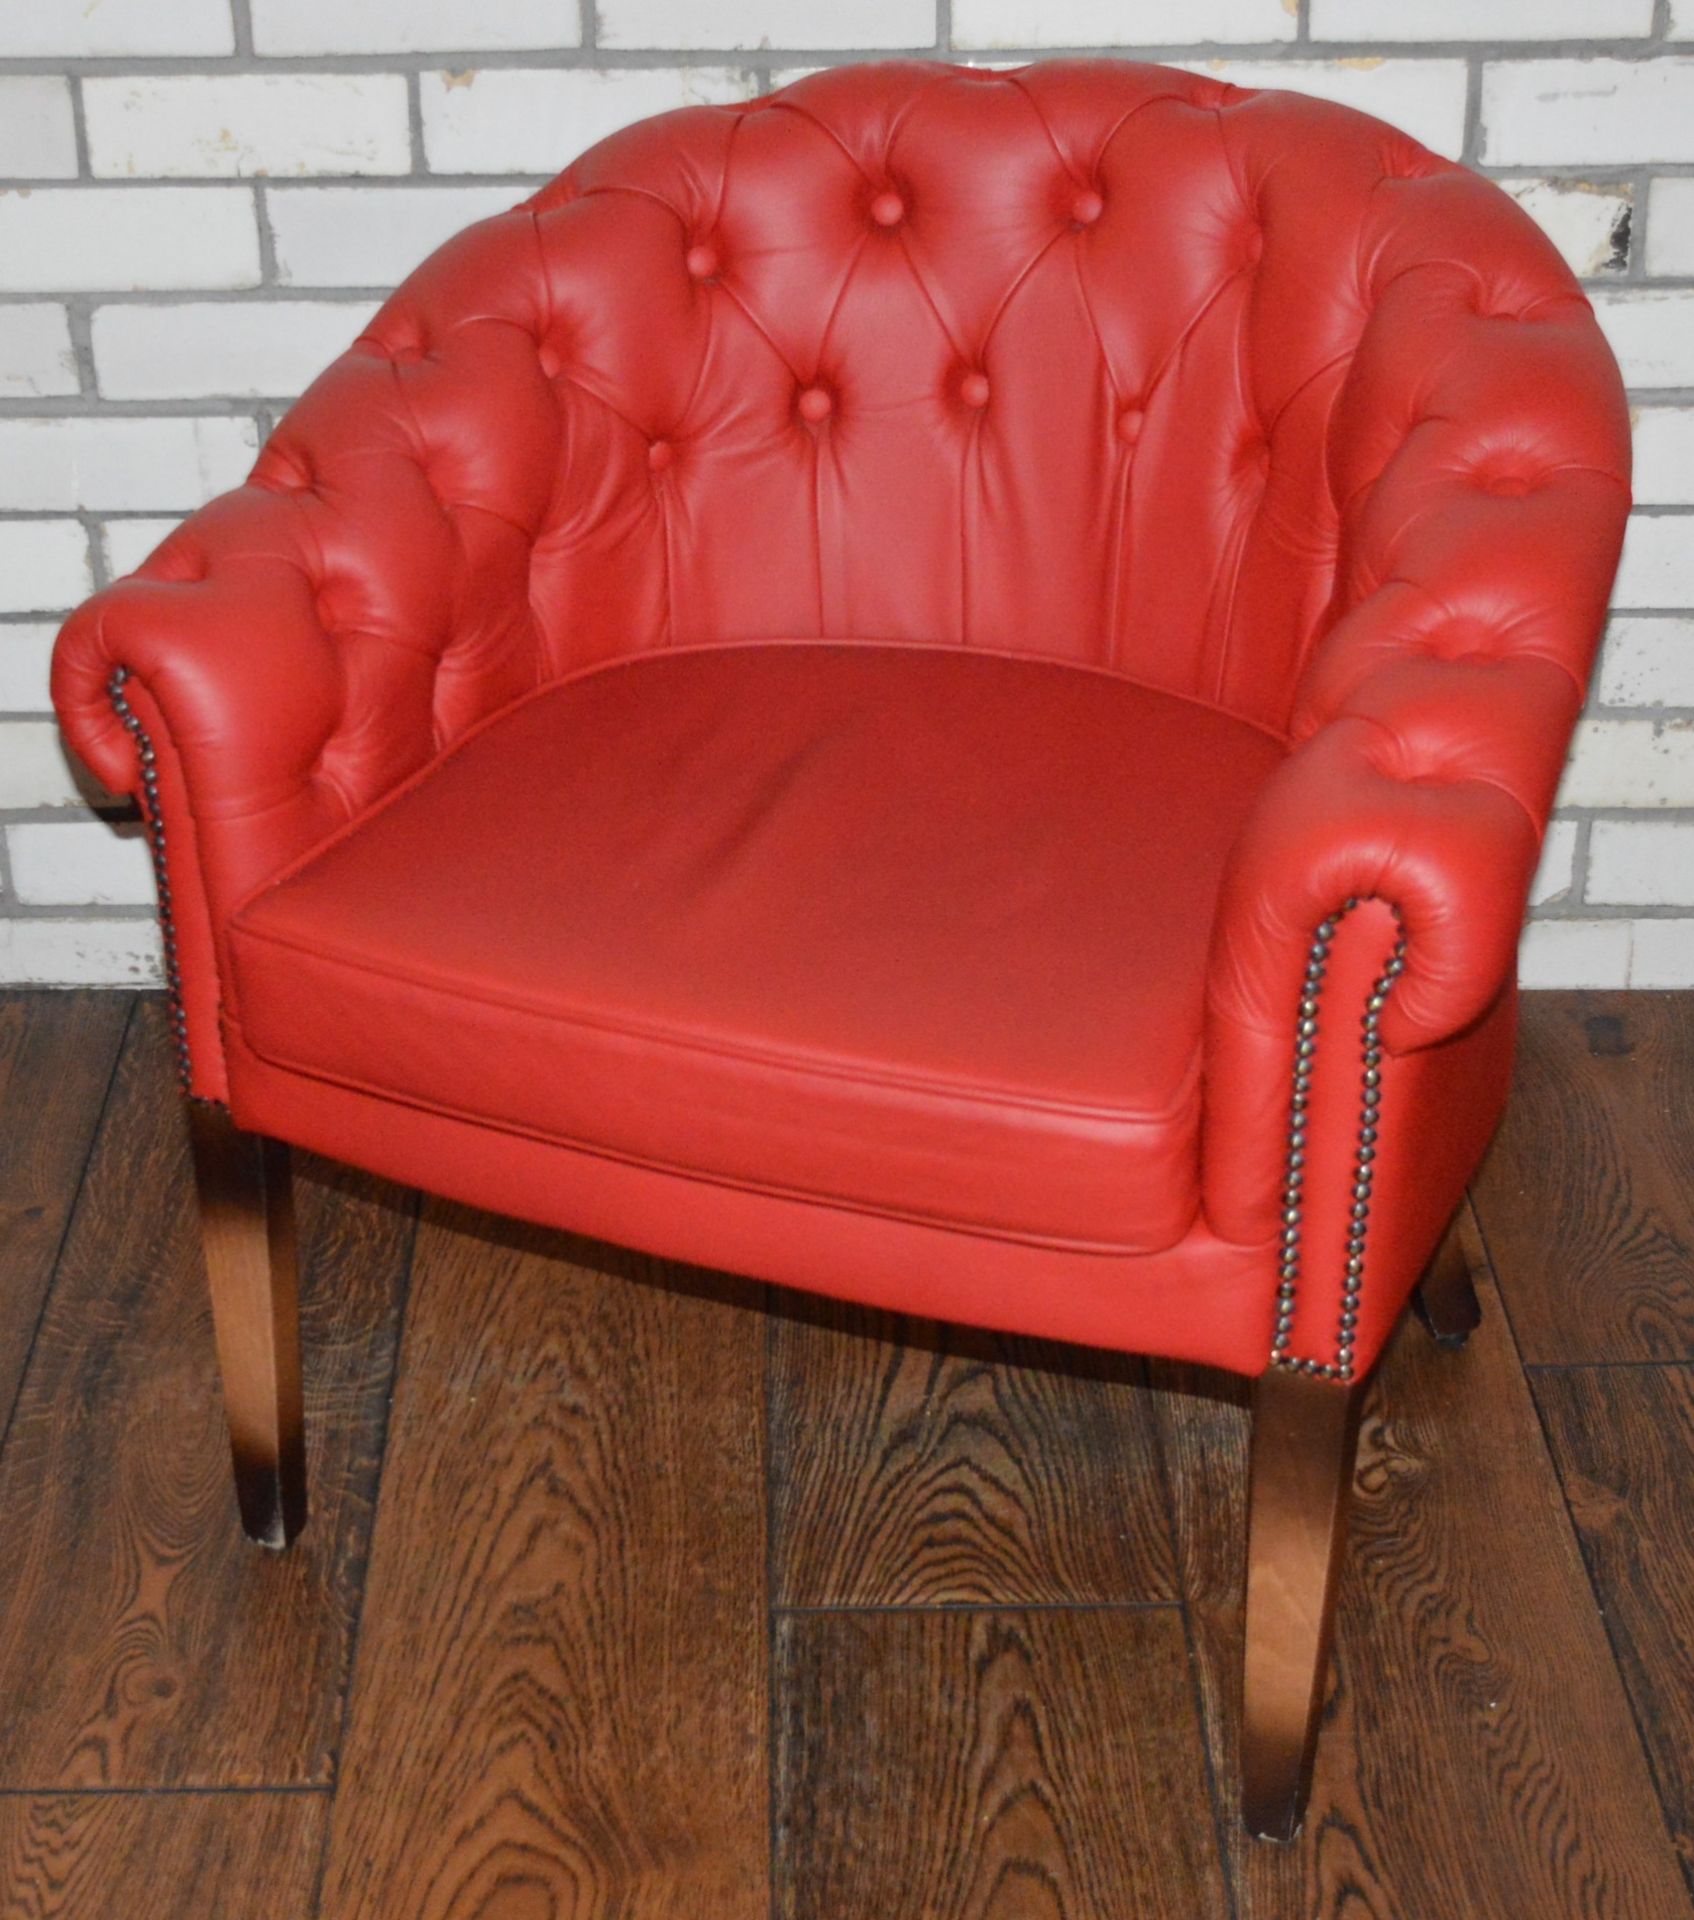 1 x Chesterfield Style Buttoned Back Red Leather Tub Chair With Hardwood Legs Finished in an